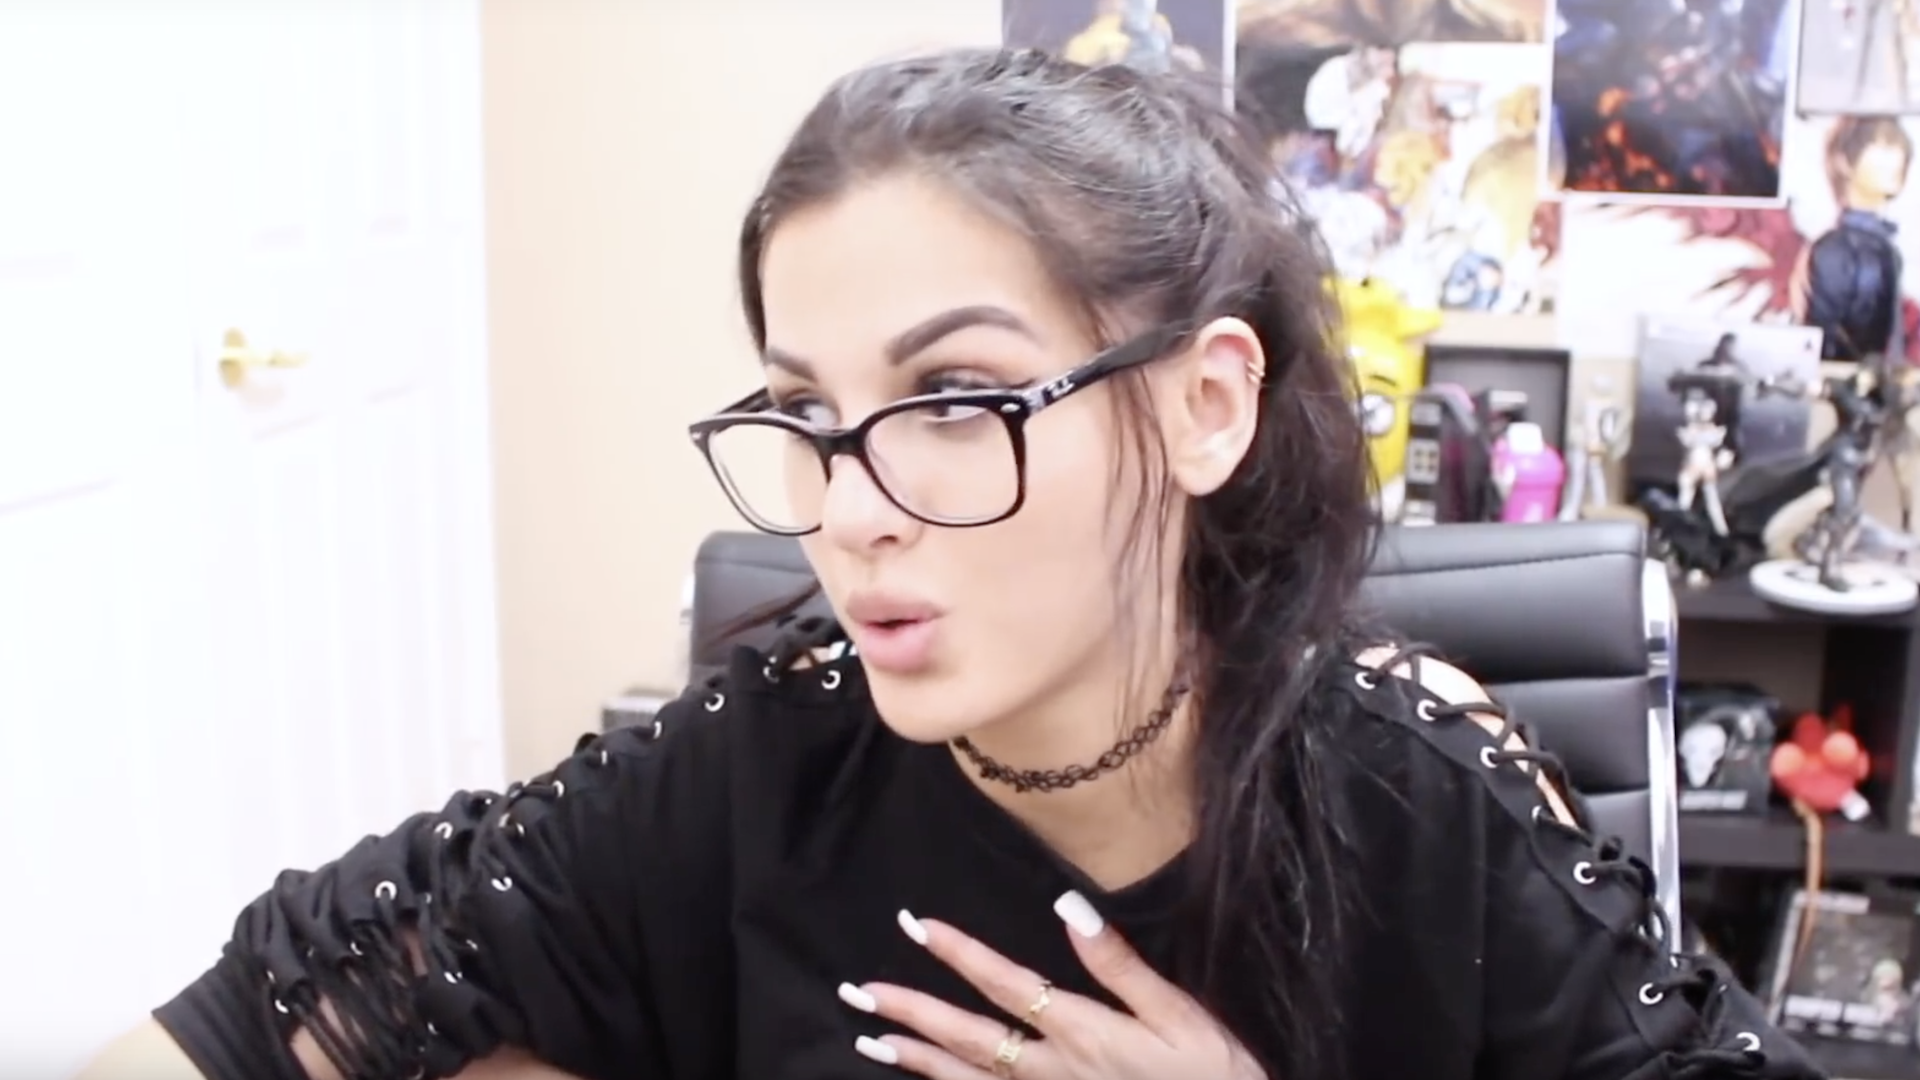 SSSniperwolf on her YouTube channel